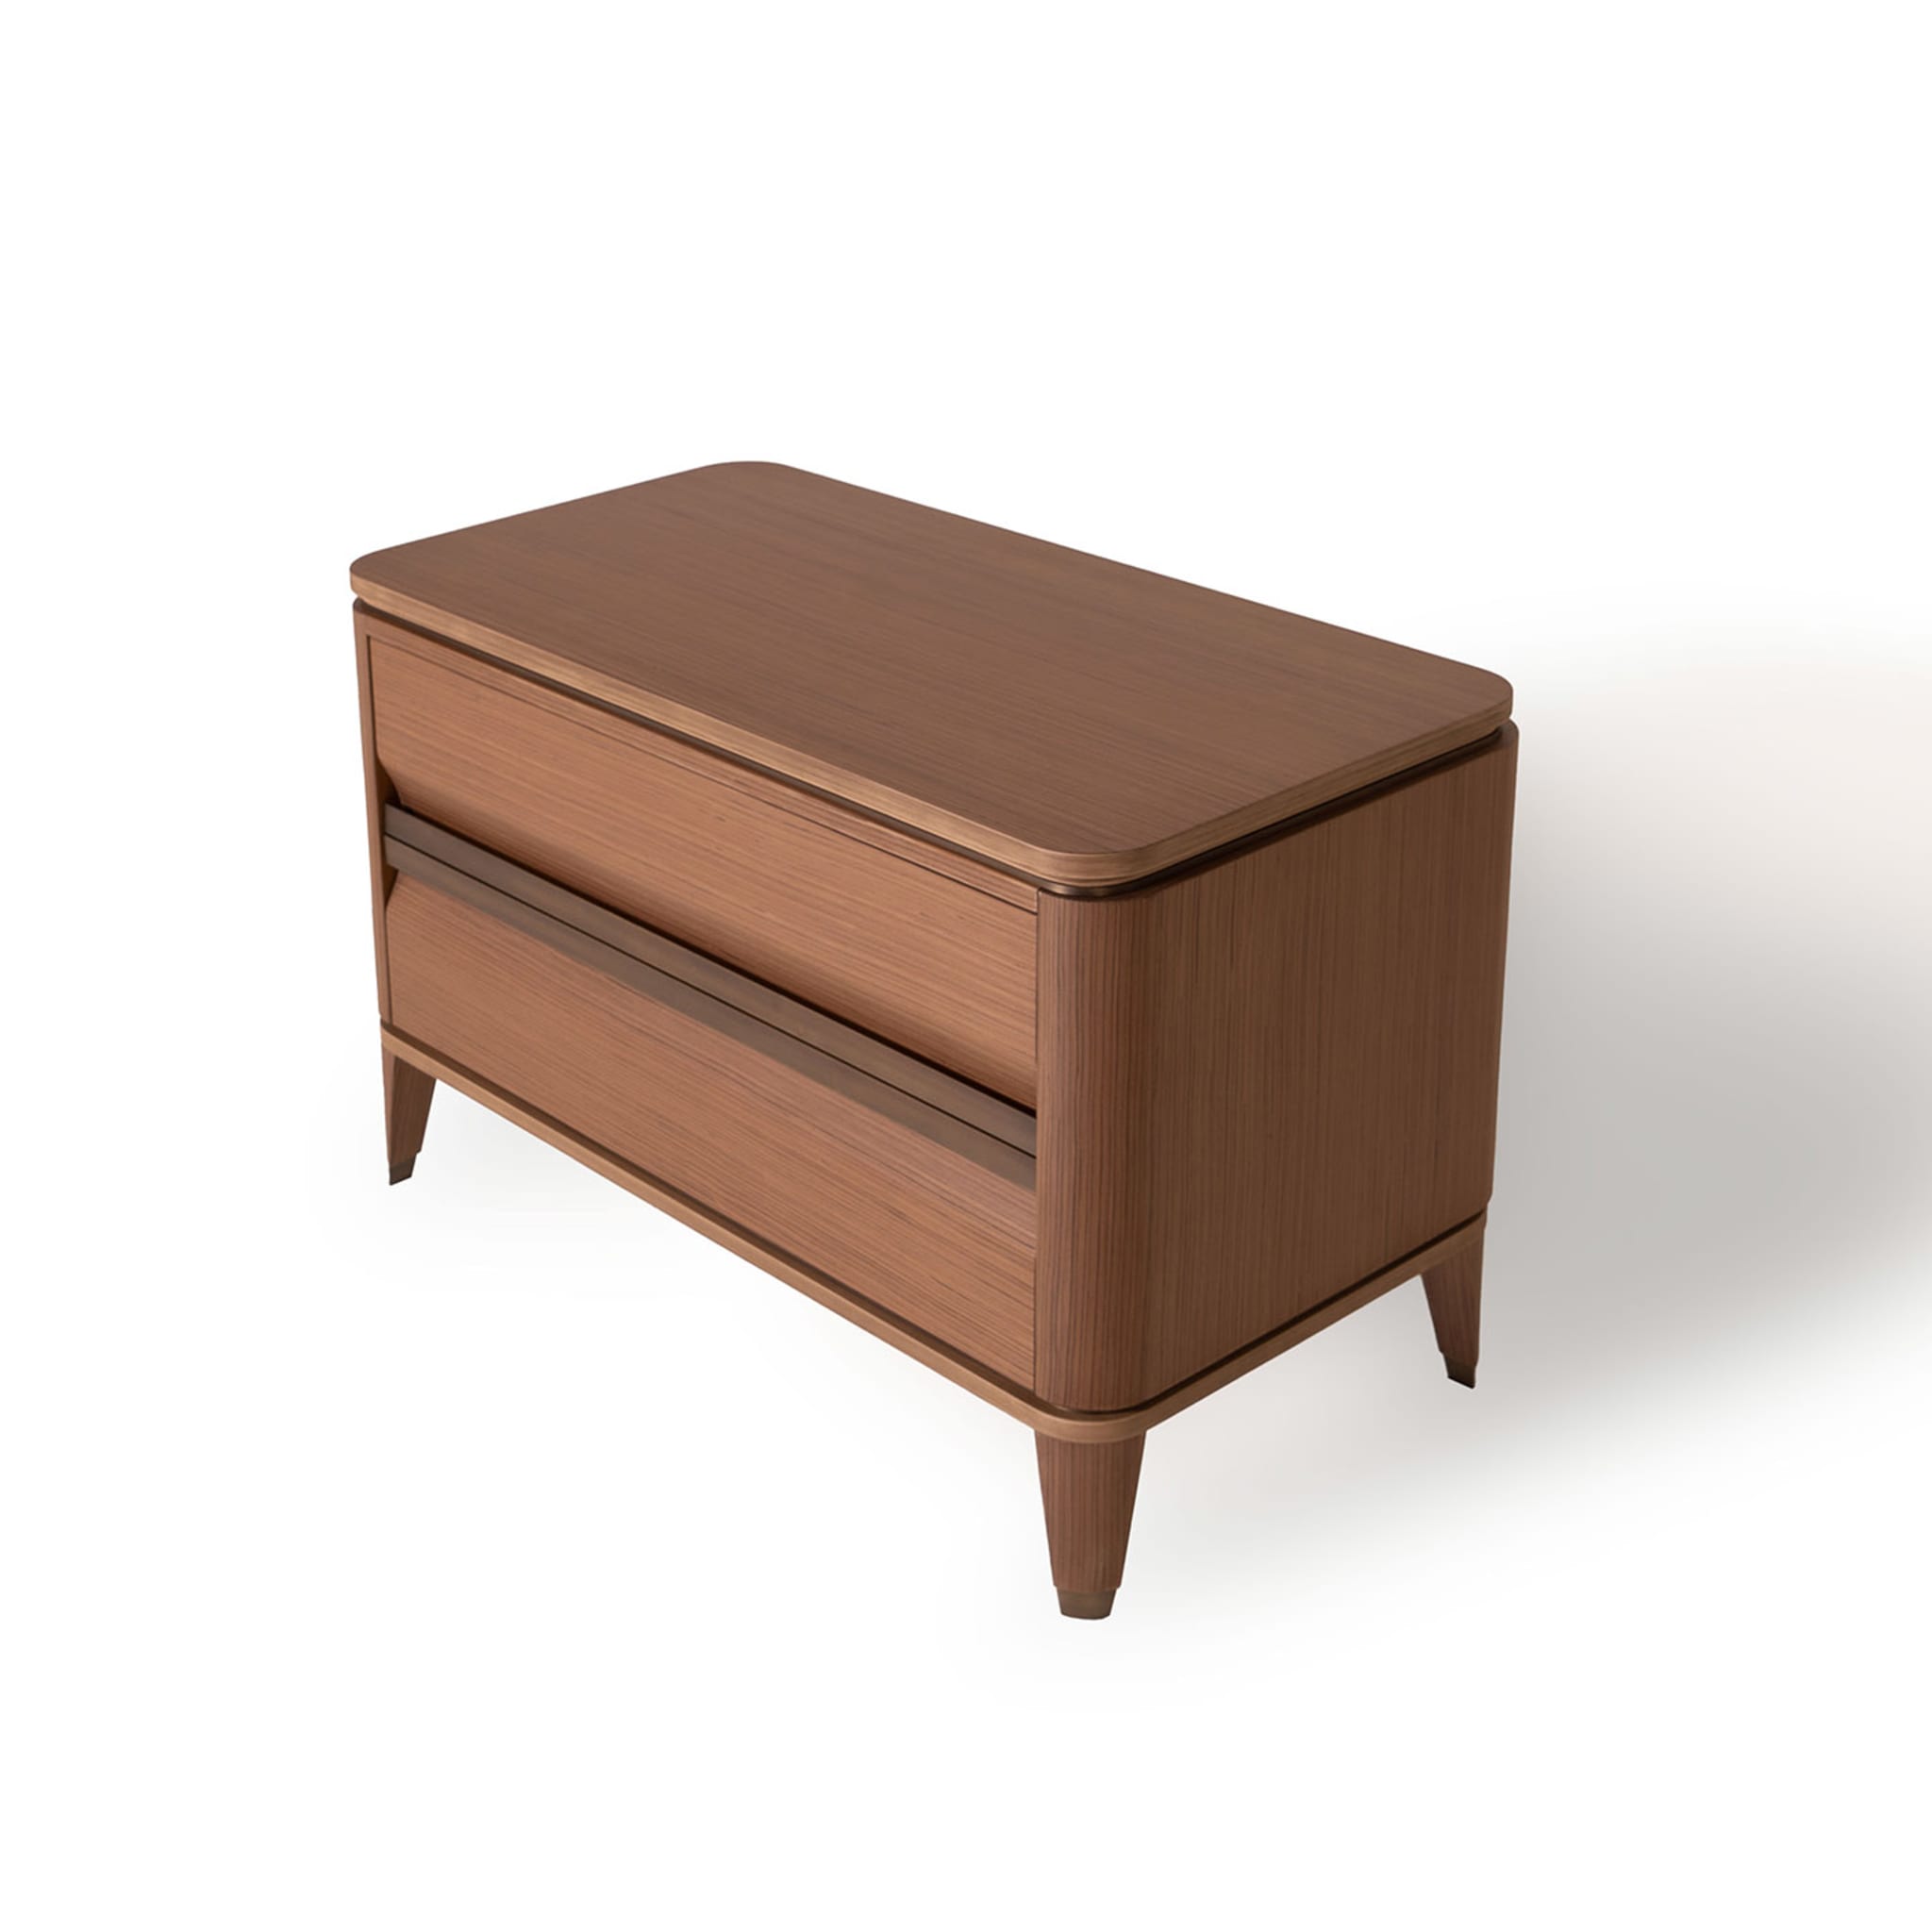 Ercolino Night Stand Extra Large with Rosewood Finish  - Alternative view 1